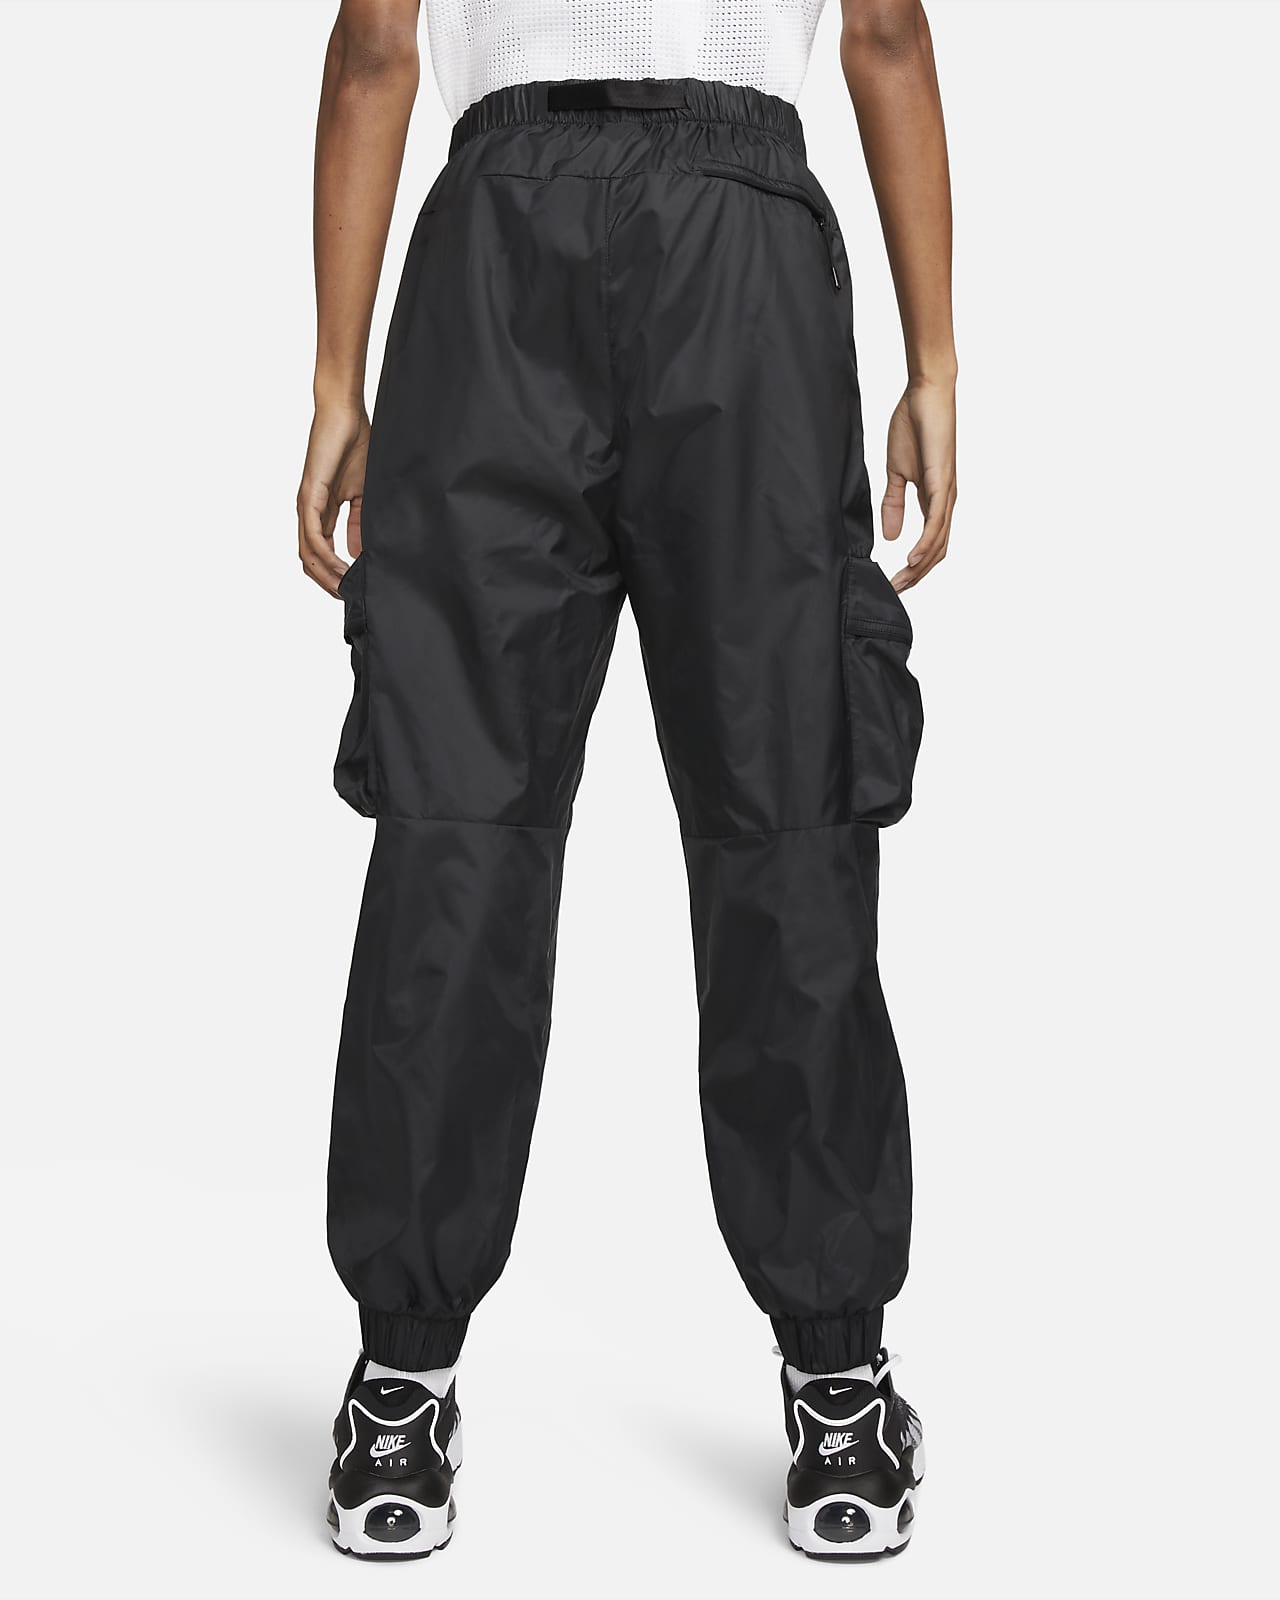 https://static.nike.com/a/images/t_PDP_1280_v1/f_auto,q_auto:eco/fdf9a461-fdab-48fb-b74e-e2e2da6dc284/tech-lined-woven-trousers-jTW0B5.png